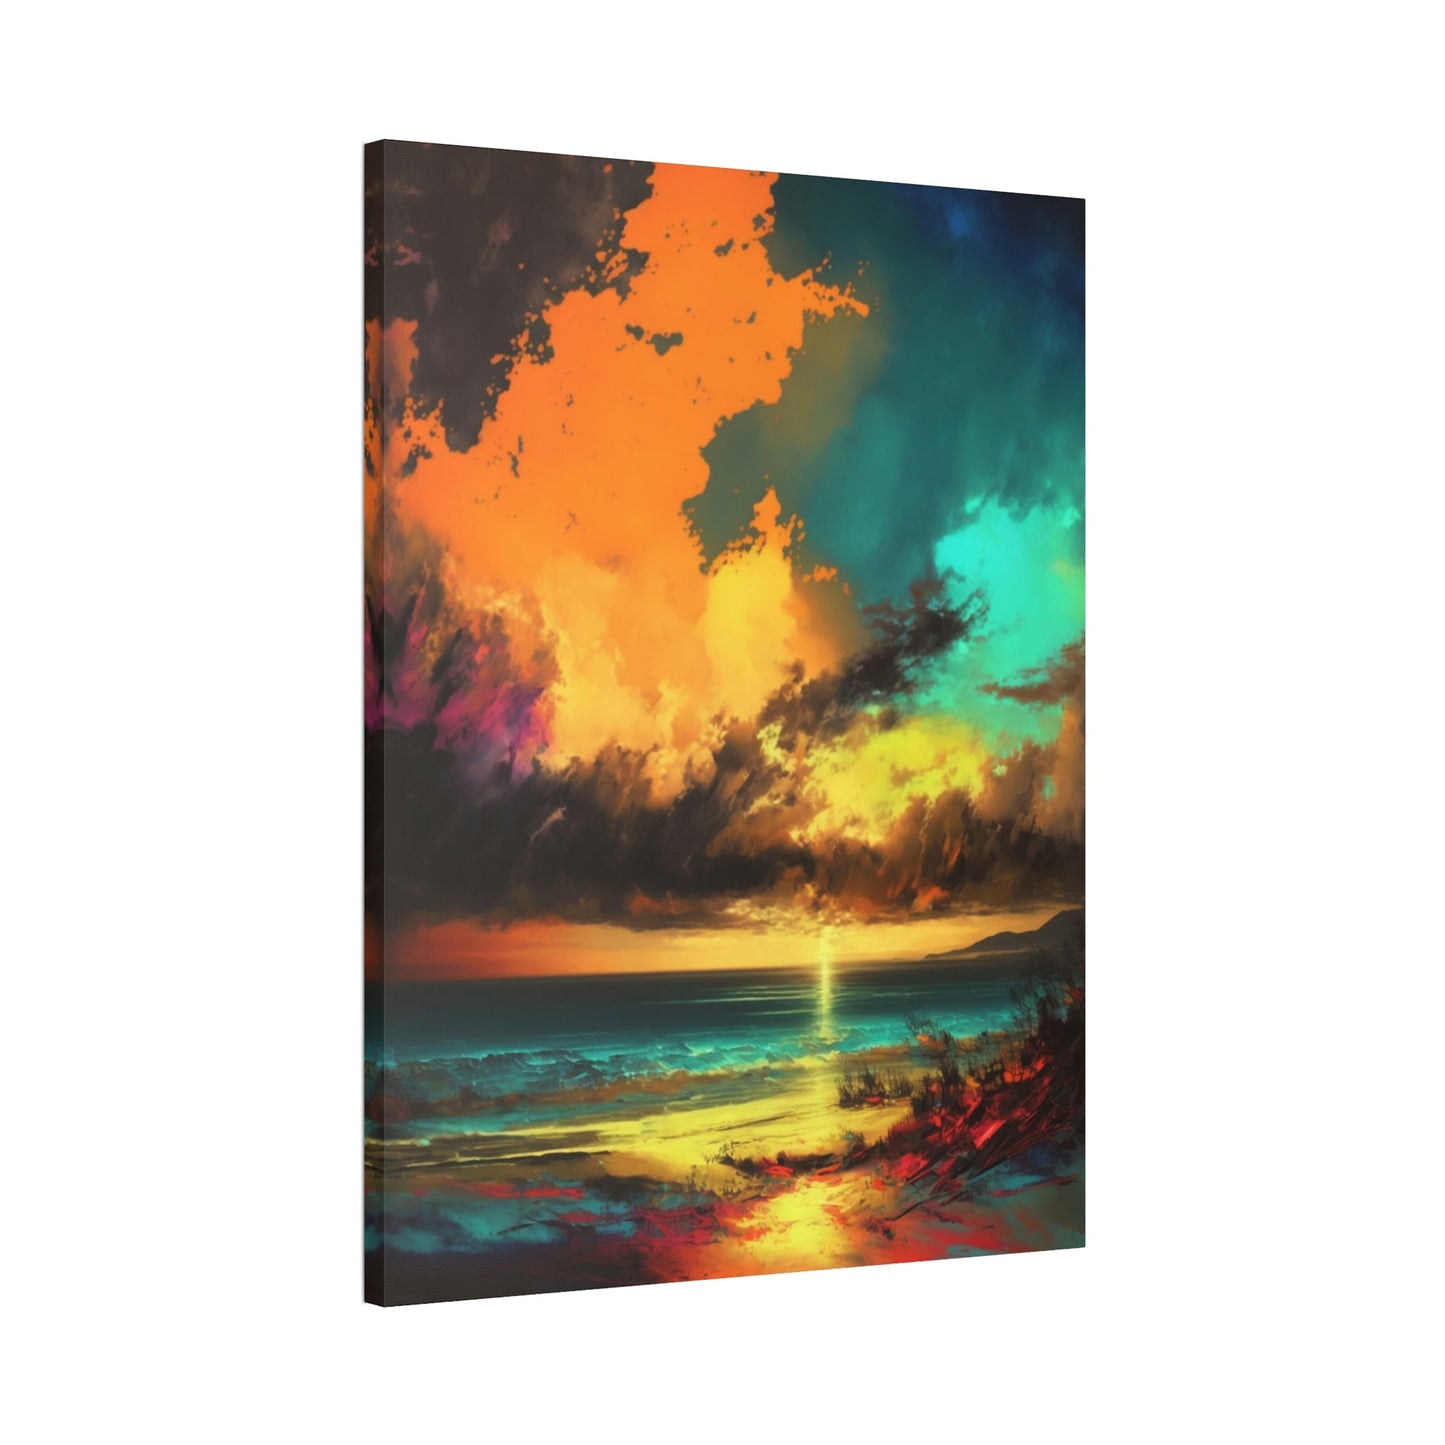 Unbridled Nature: A Print on Canvas & Poster of a Breathtaking Landscape